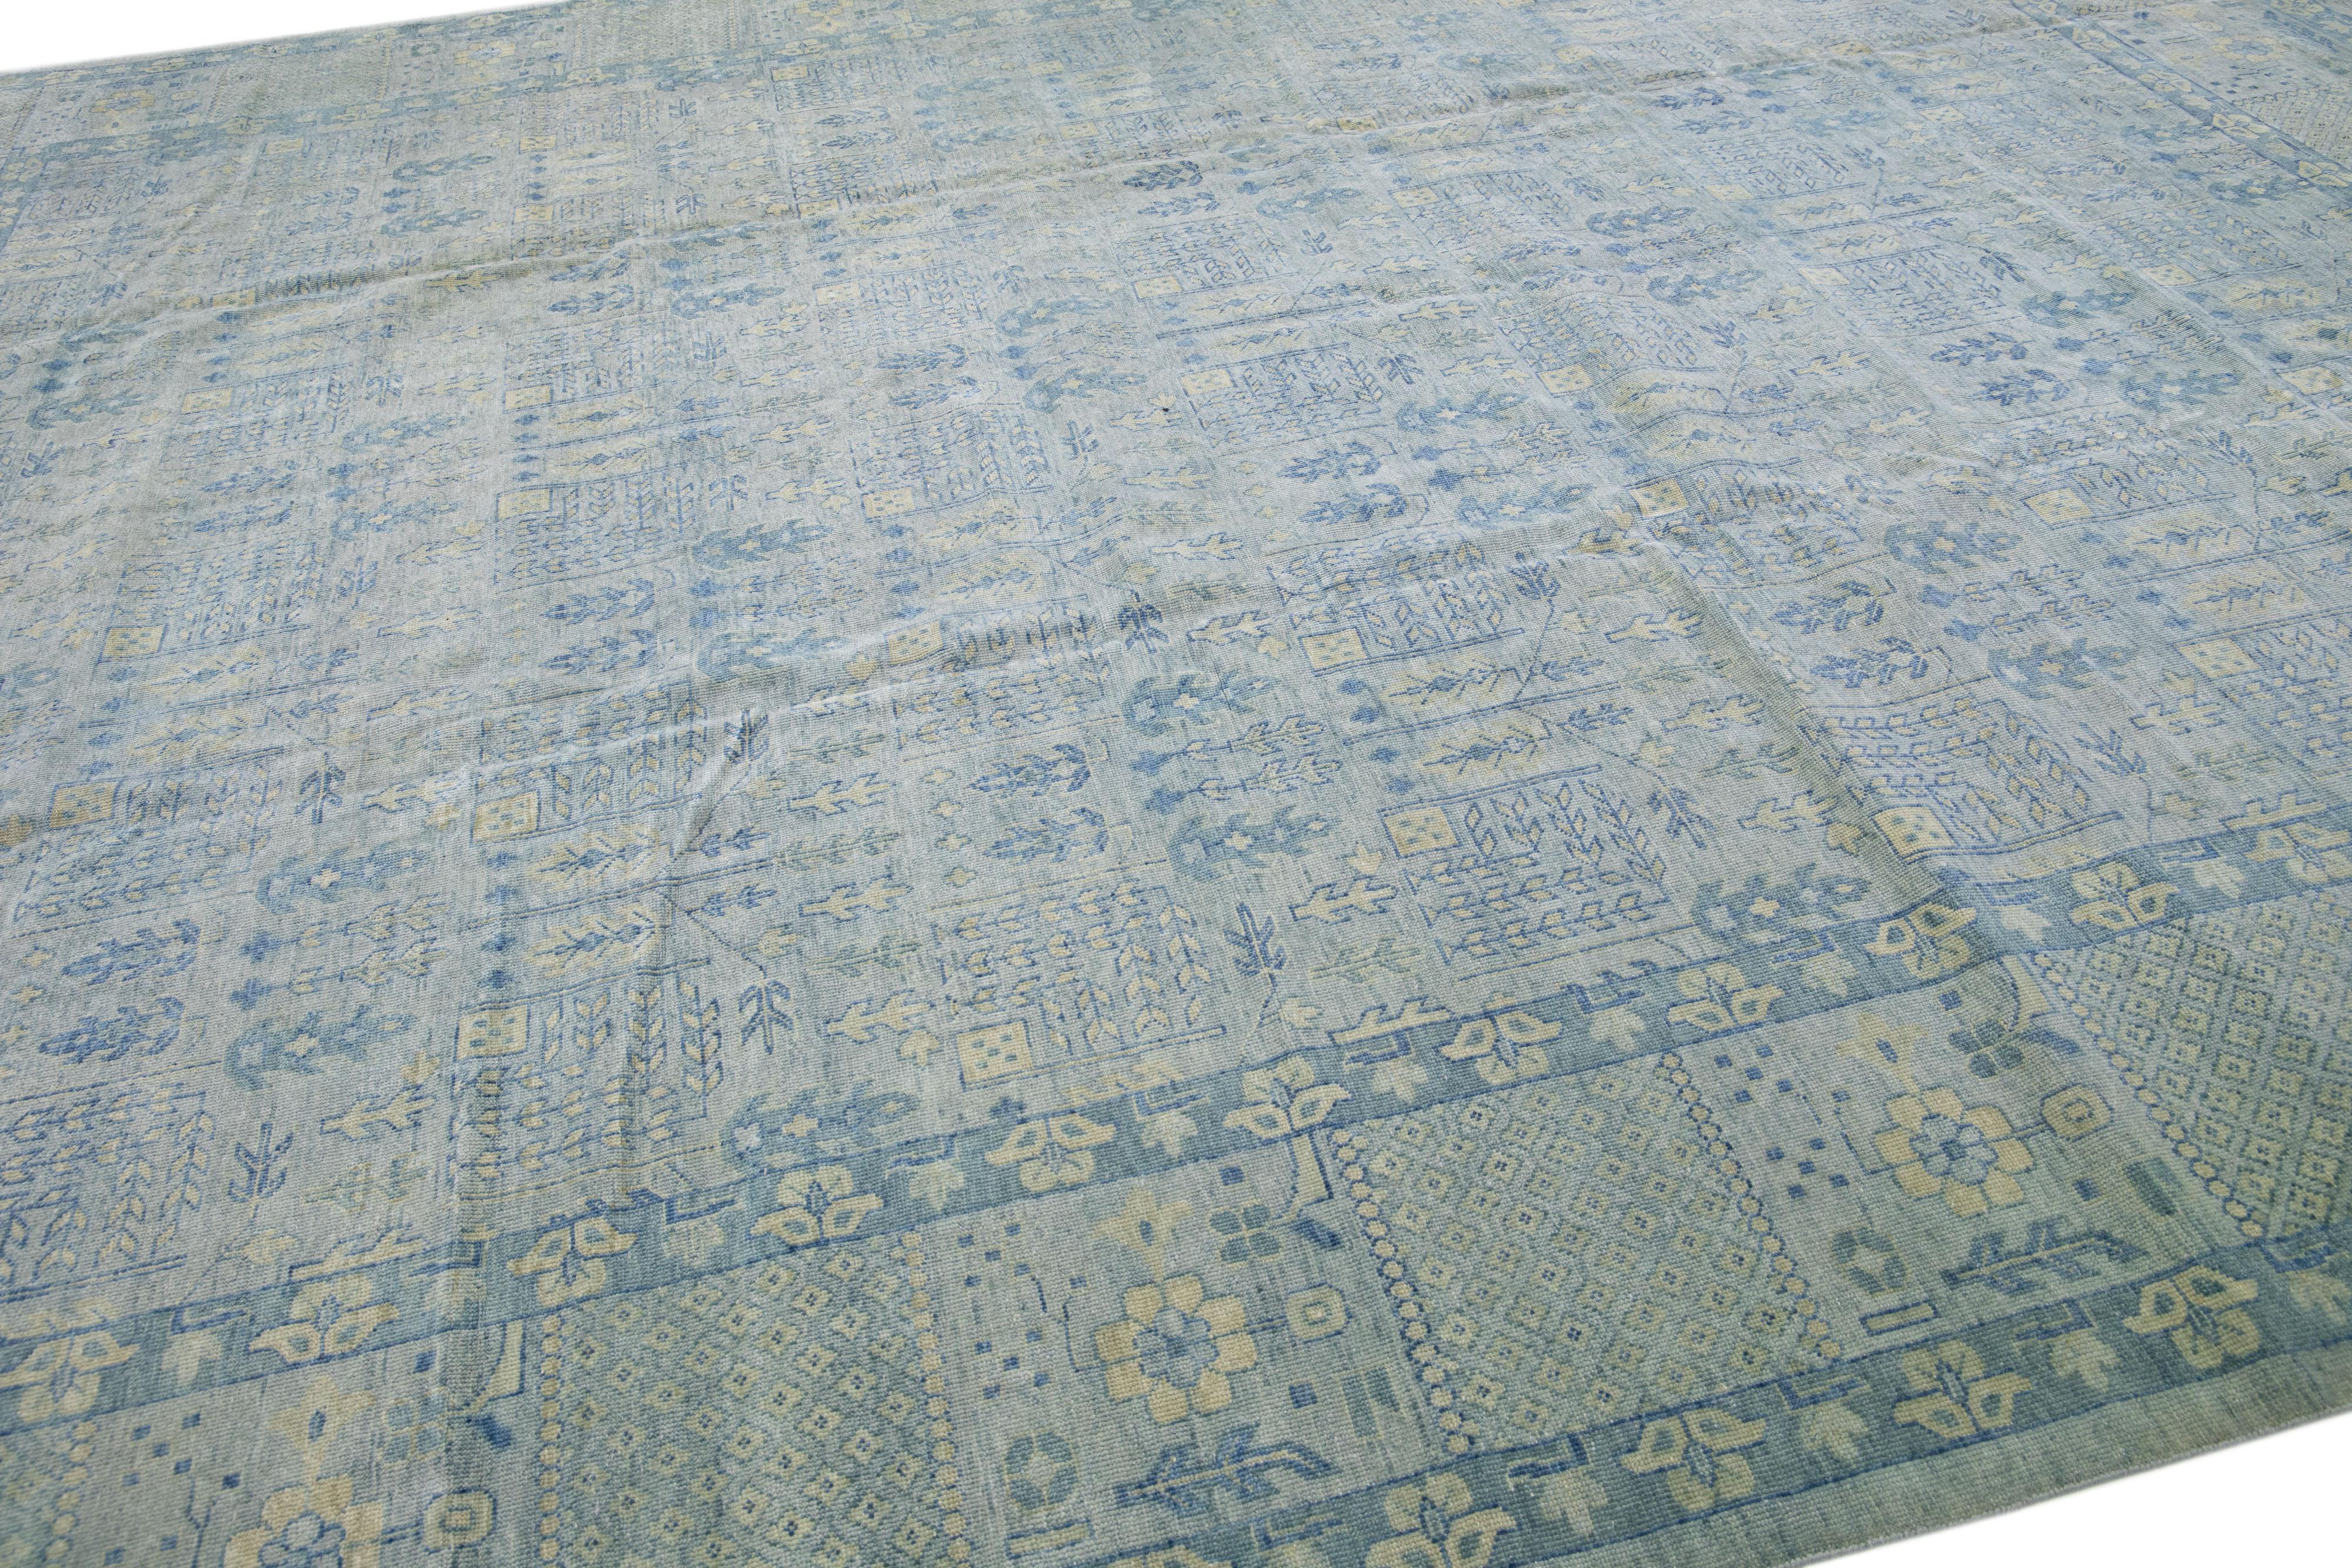 Beautiful modern Khotan-Style hand-knotted wool rug with a gray field. This piece has blue and beige accents in a gorgeous all-over floral pattern design.

This rug measures: 11'11